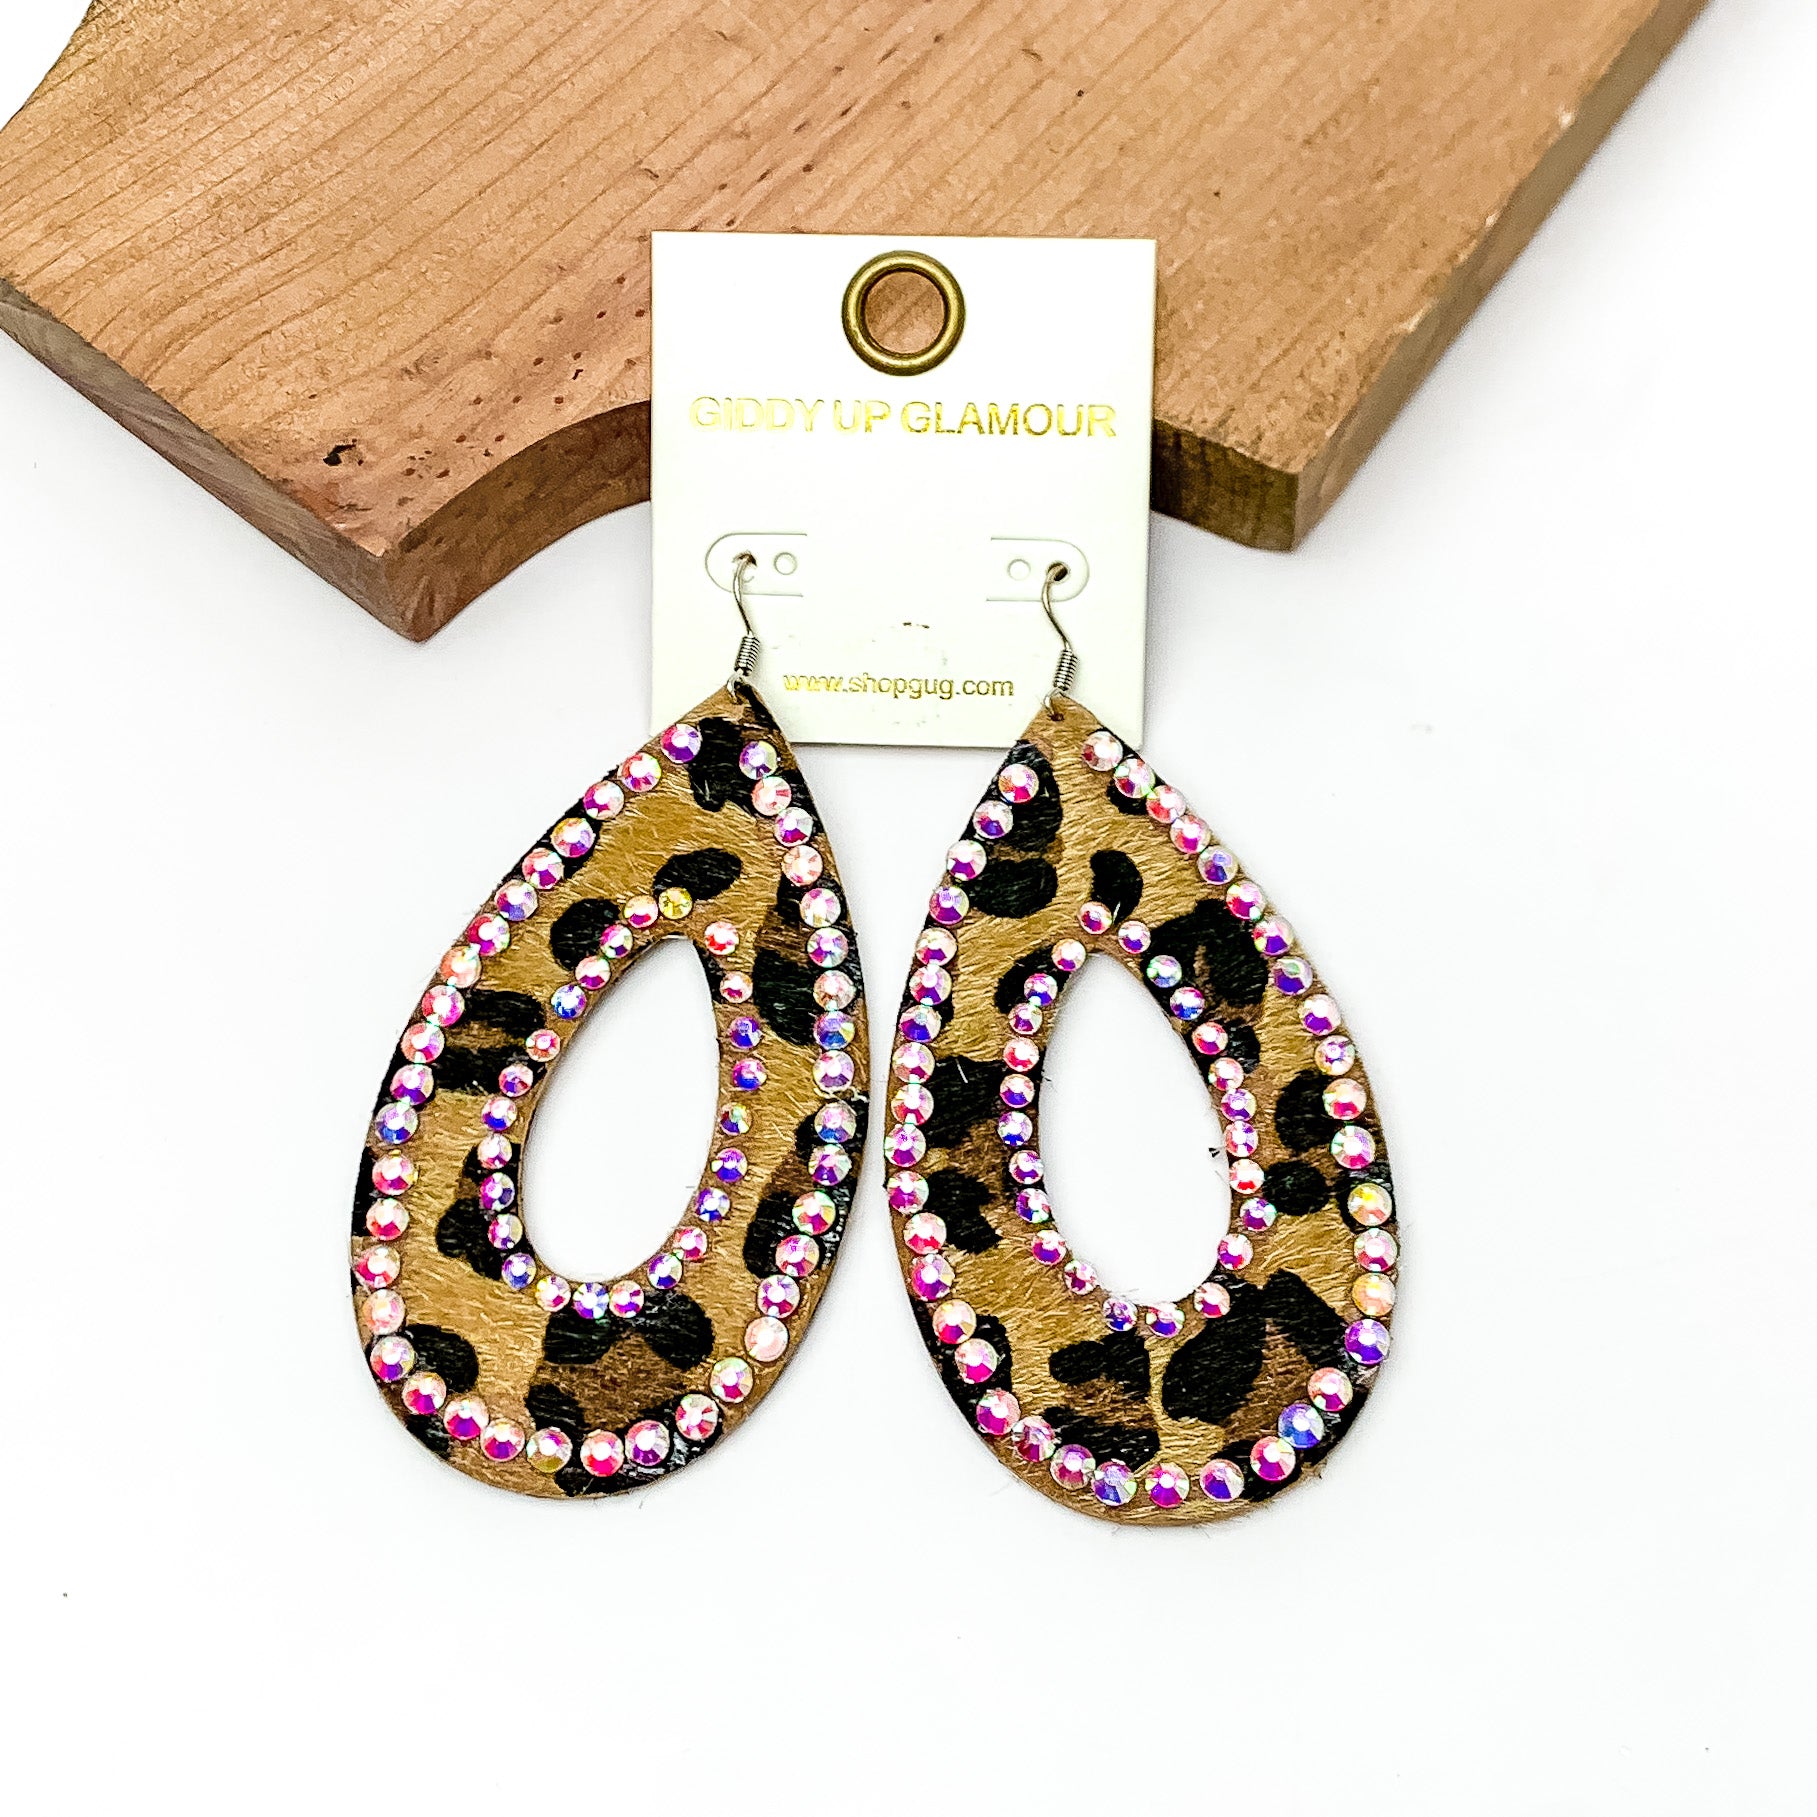 Leopard Print Open Teardrop Earring With AB Crystals. Pictured on a white background with the earrings laying against a piece of wood.